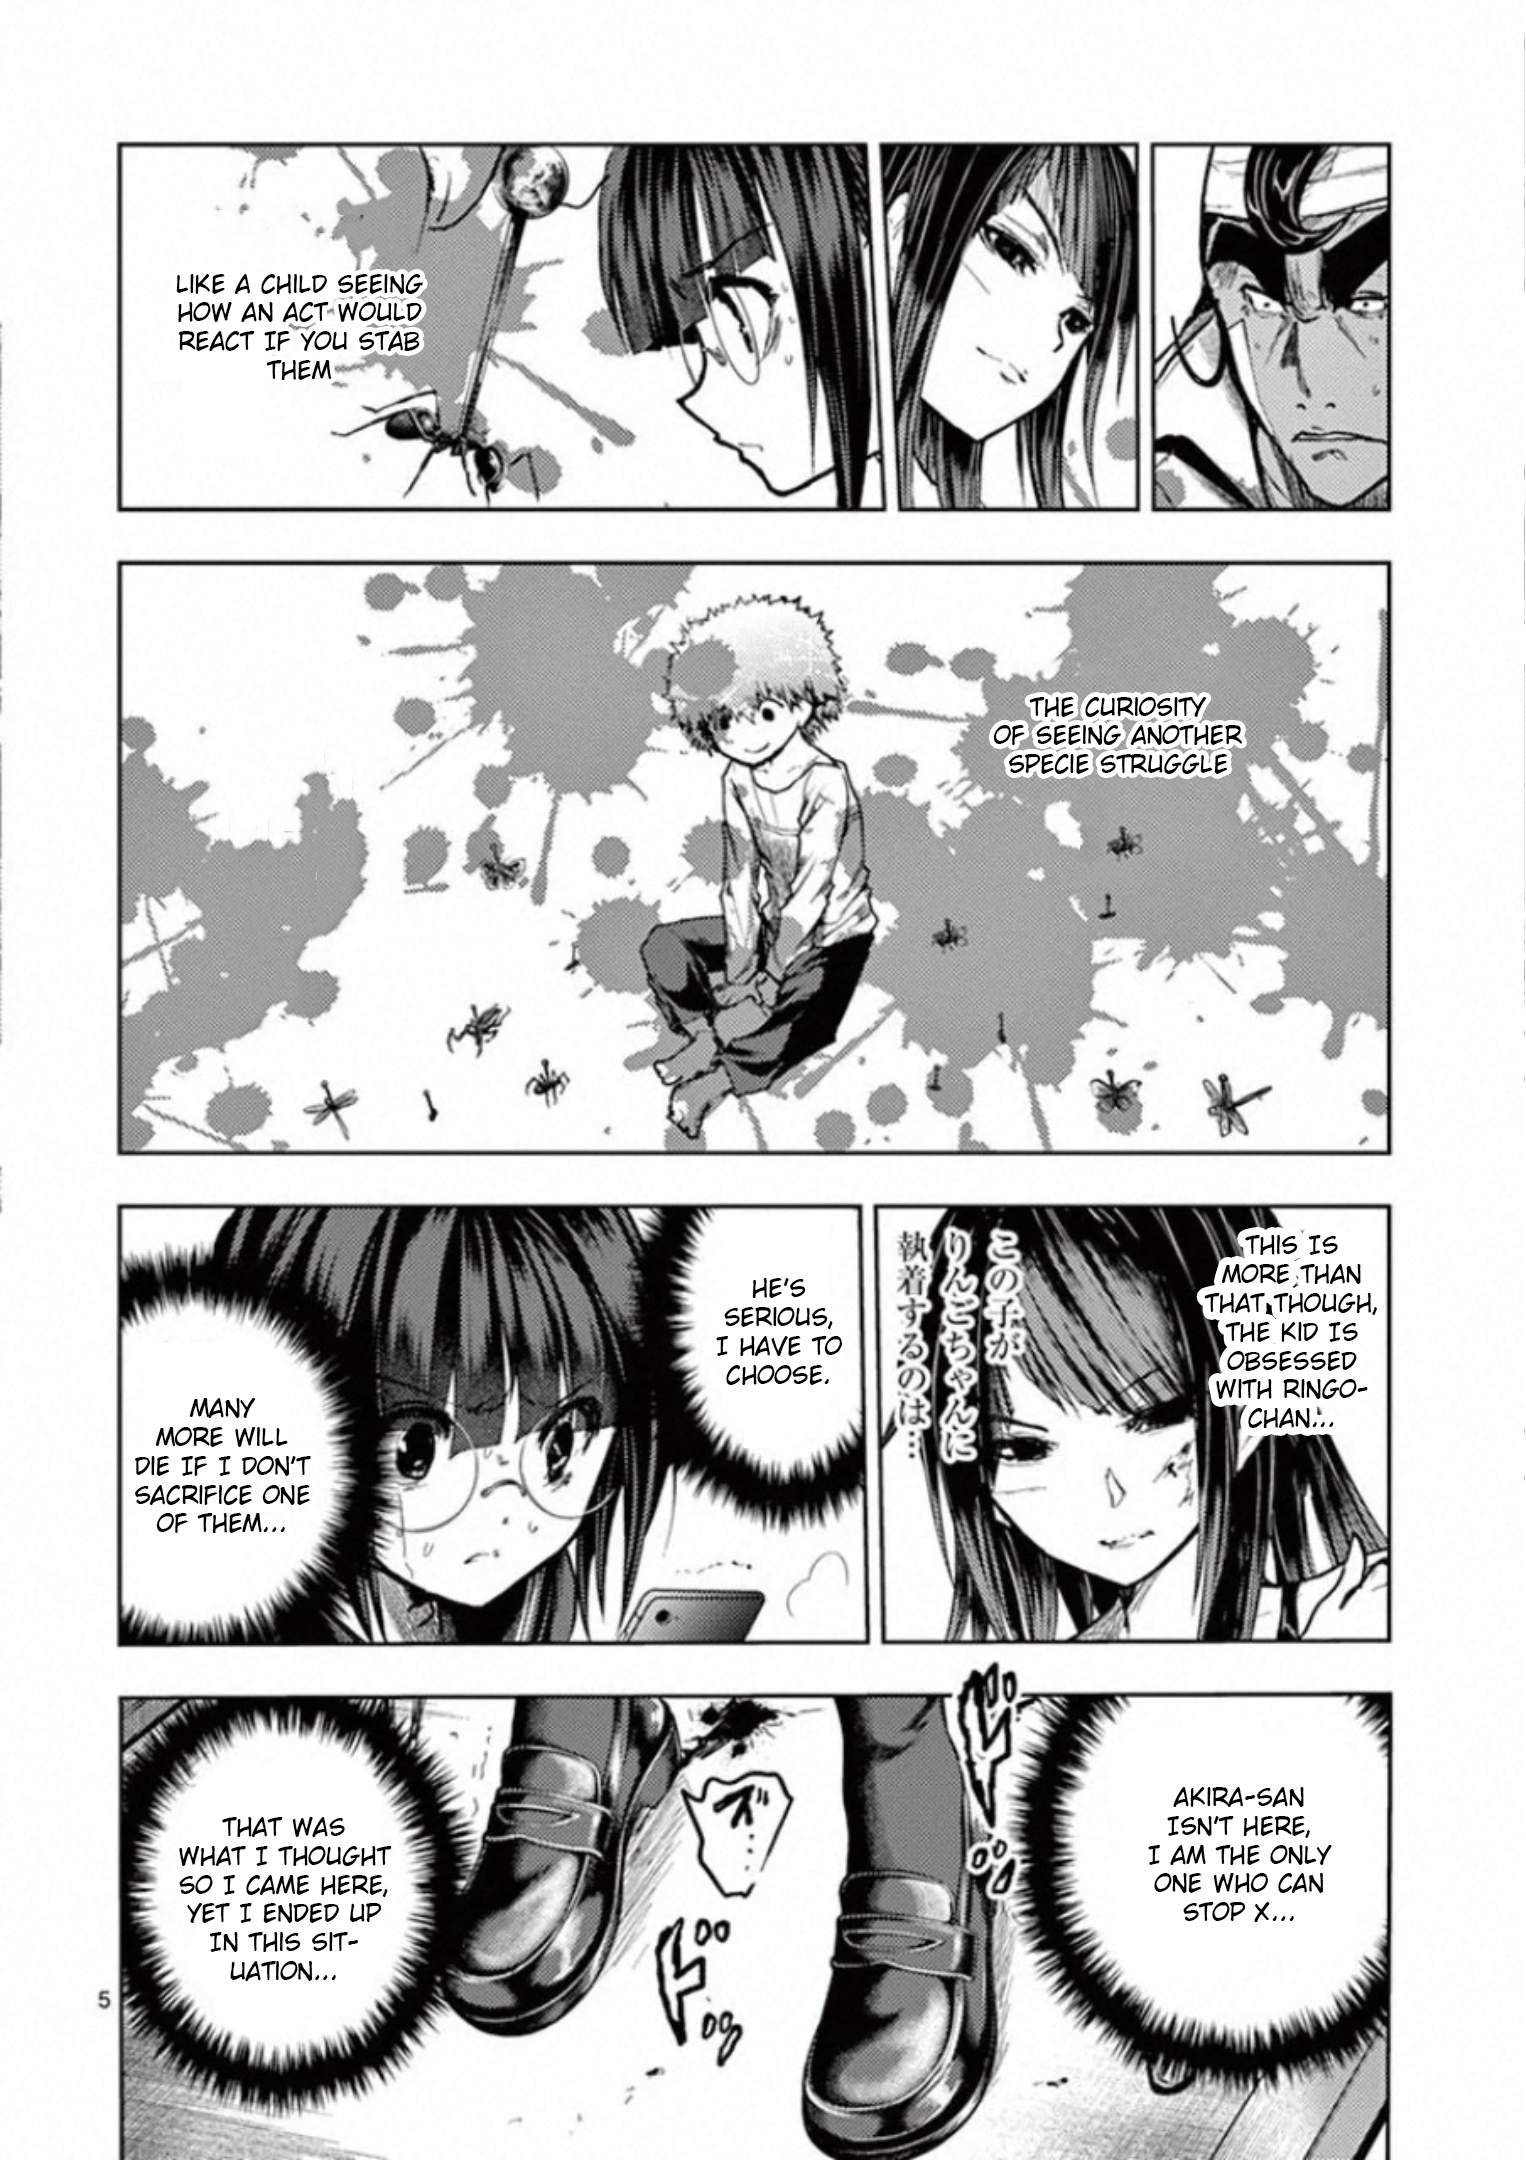 Start Fighting 5 Seconds After Meeting - chapter 123 - #5